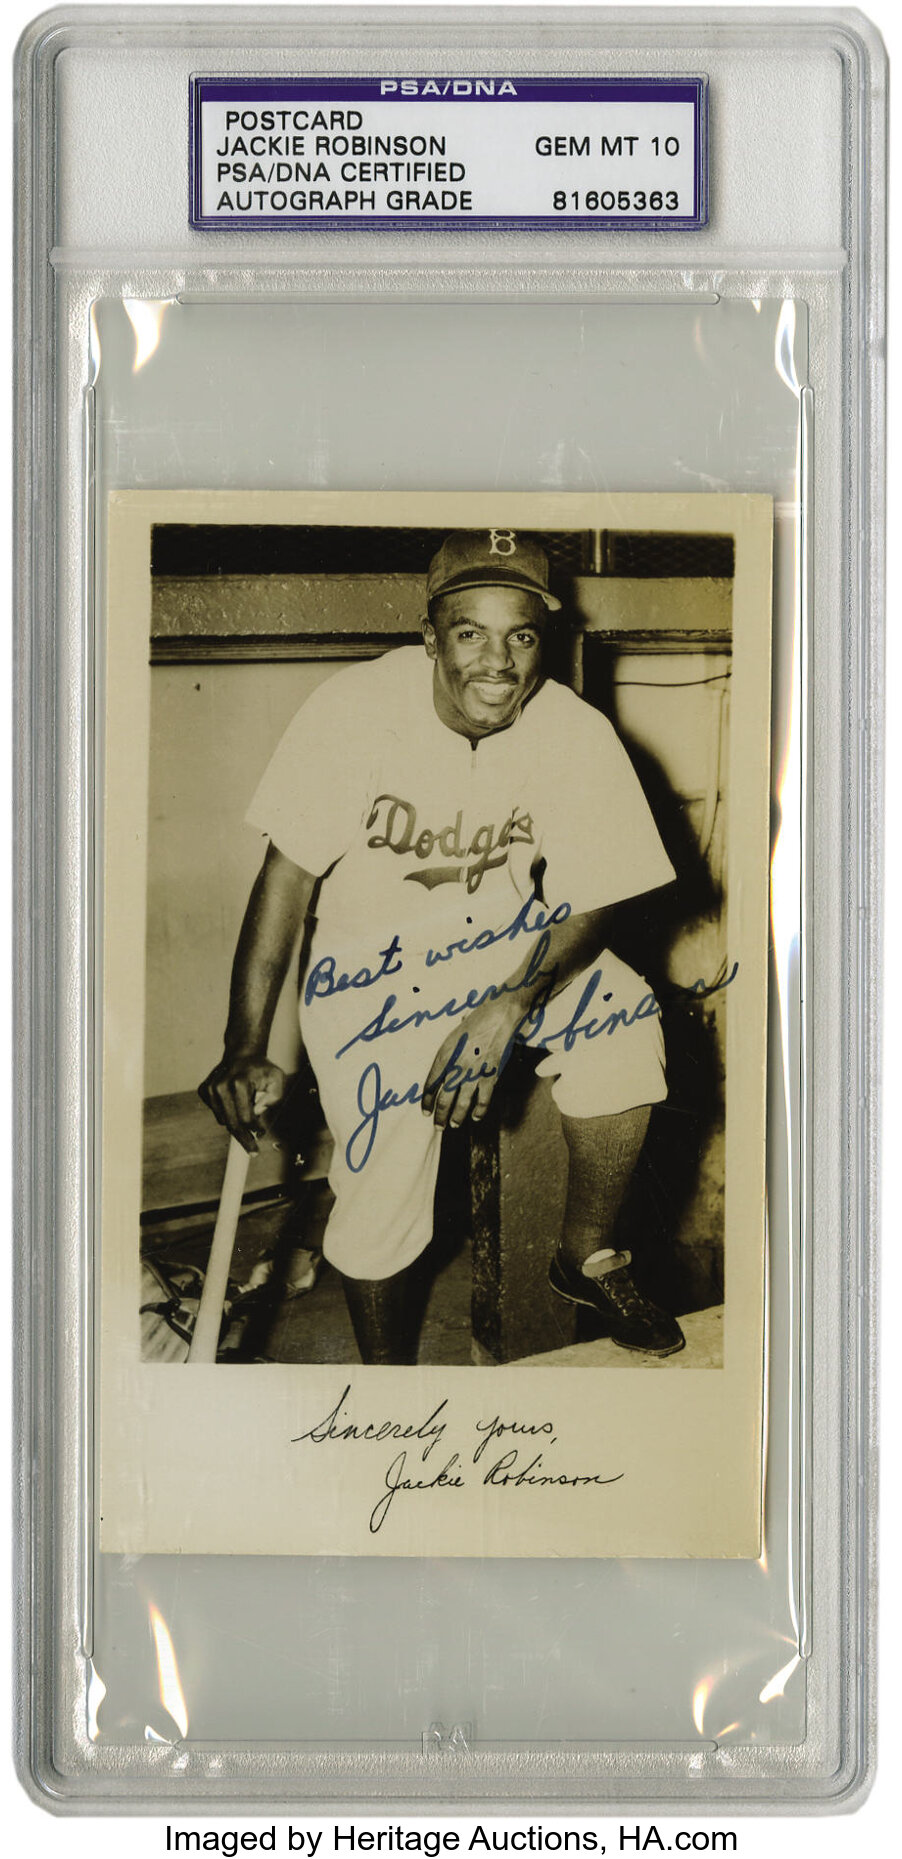 Sell or Auction Your Jackie Robinson Signature / Autograph / Signed Page